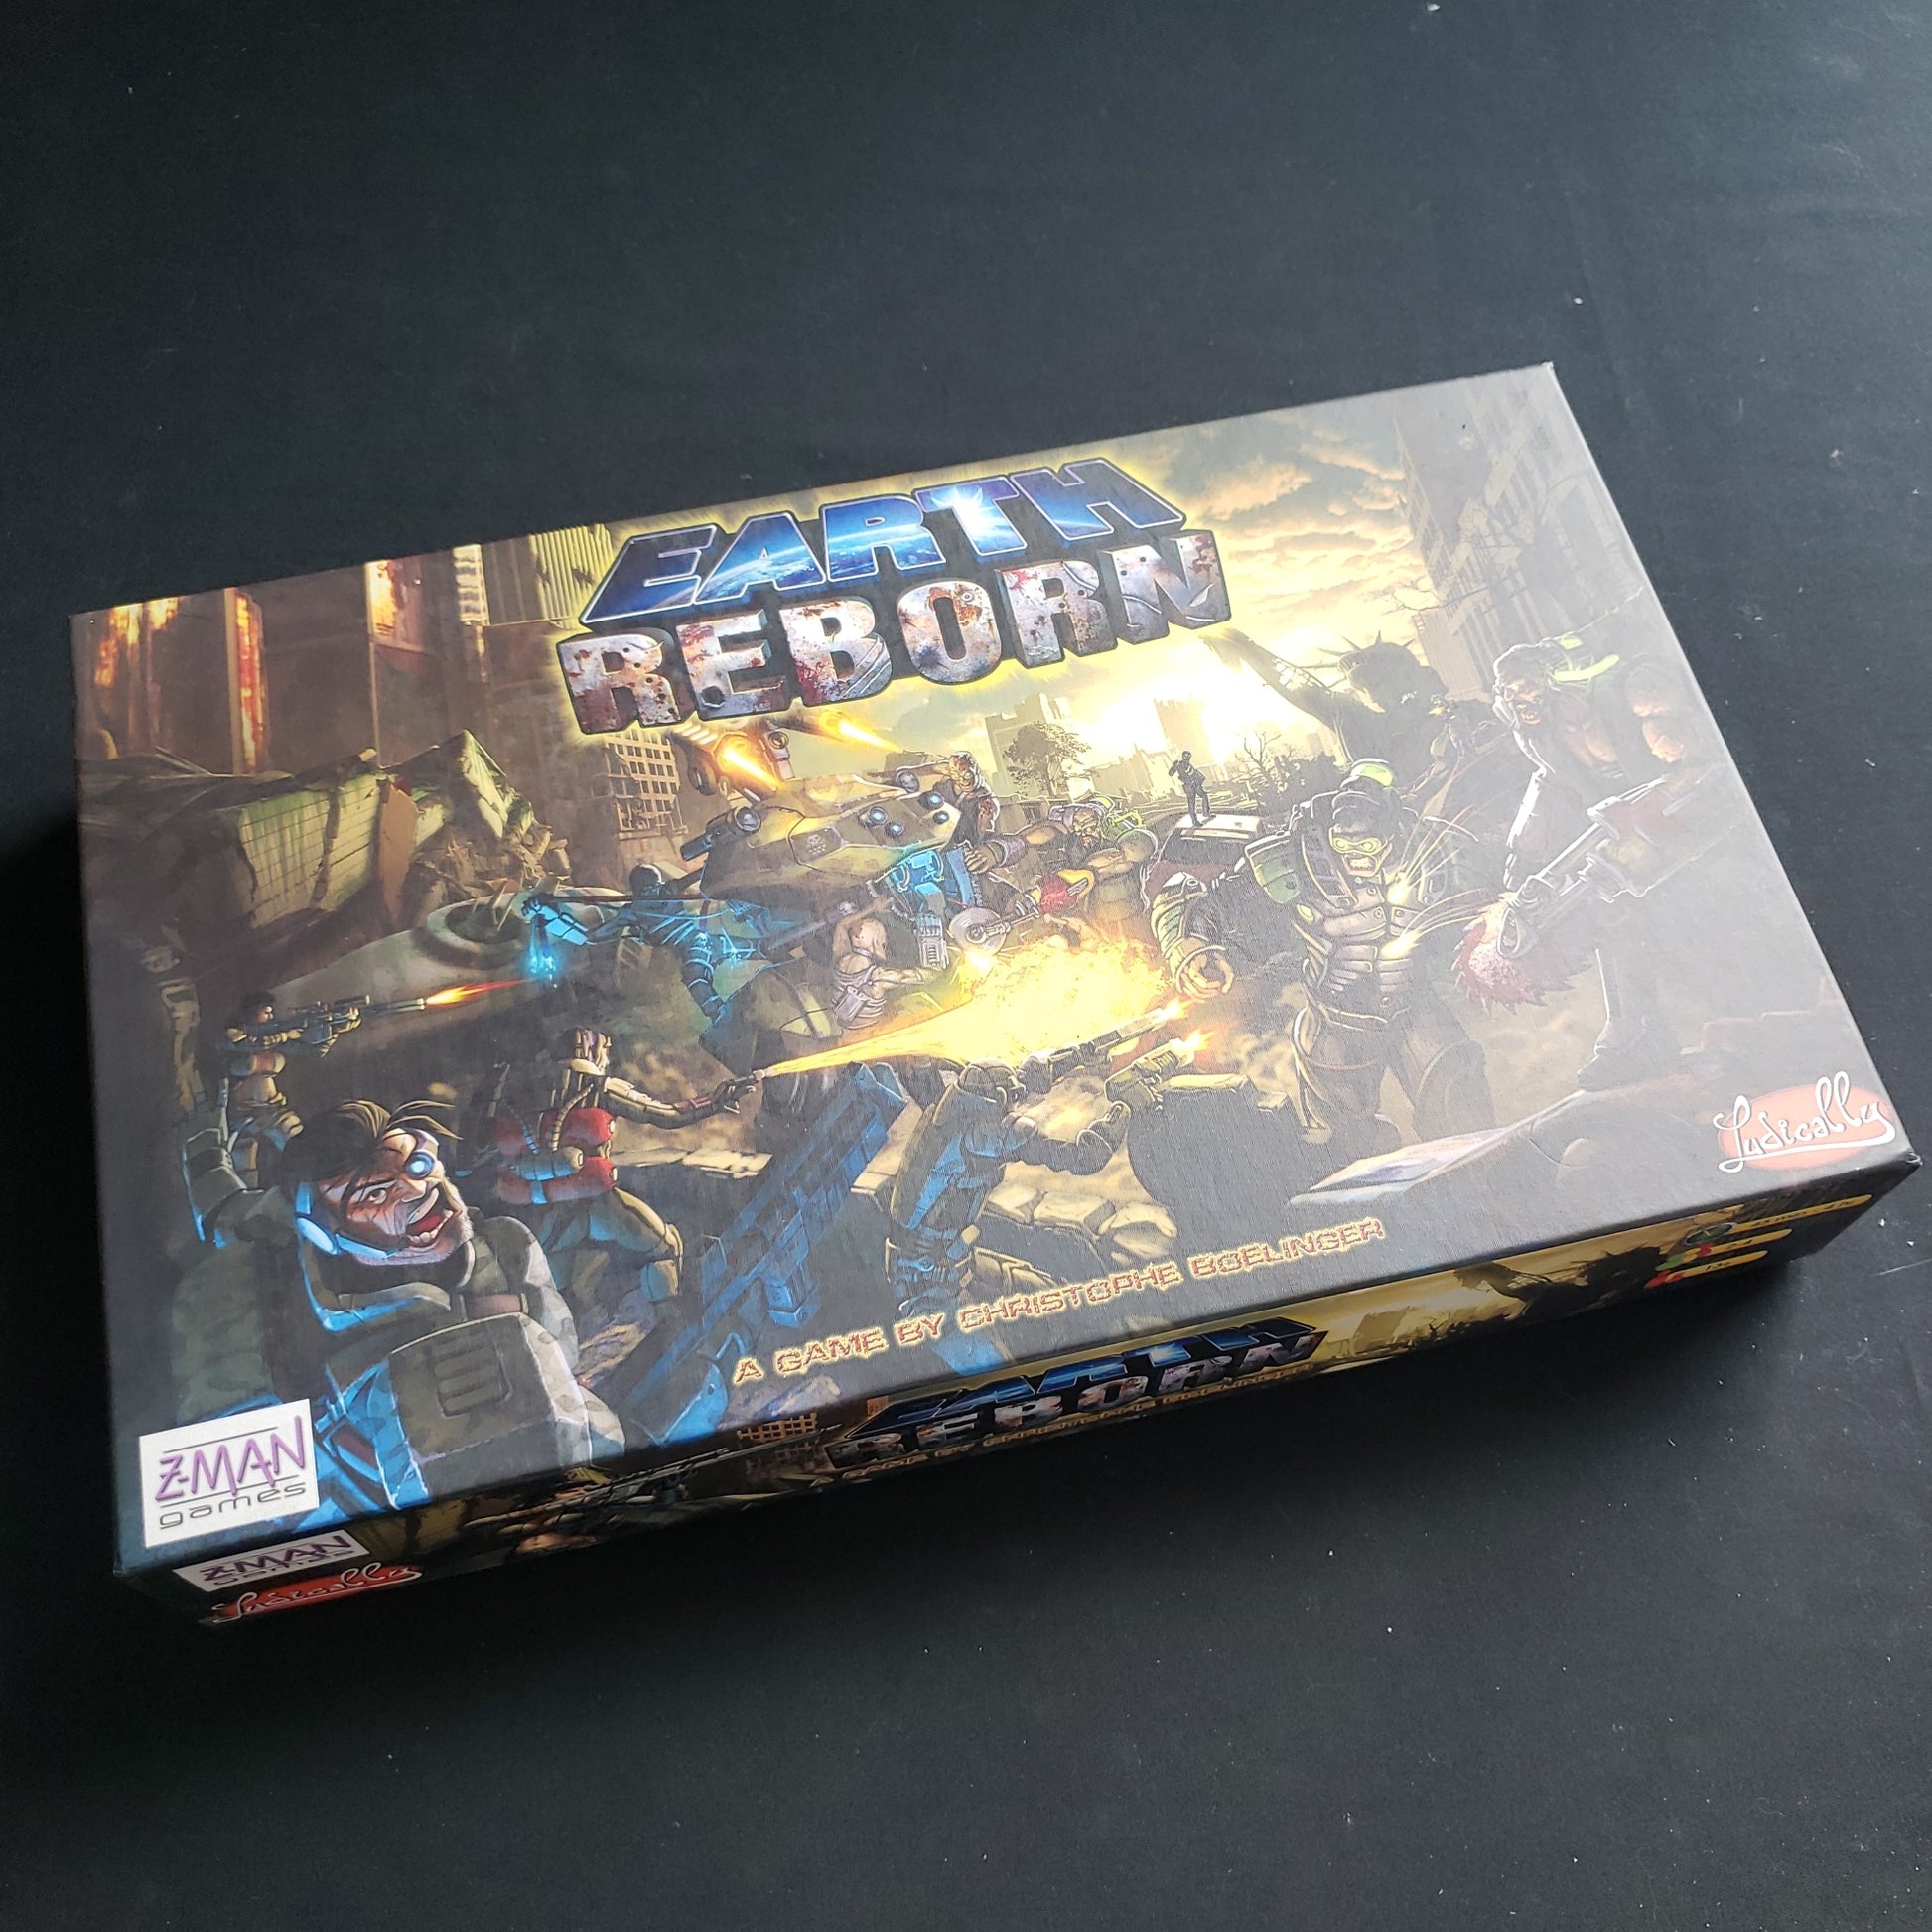 Image shows the front cover of the box of the Earth Reborn board game